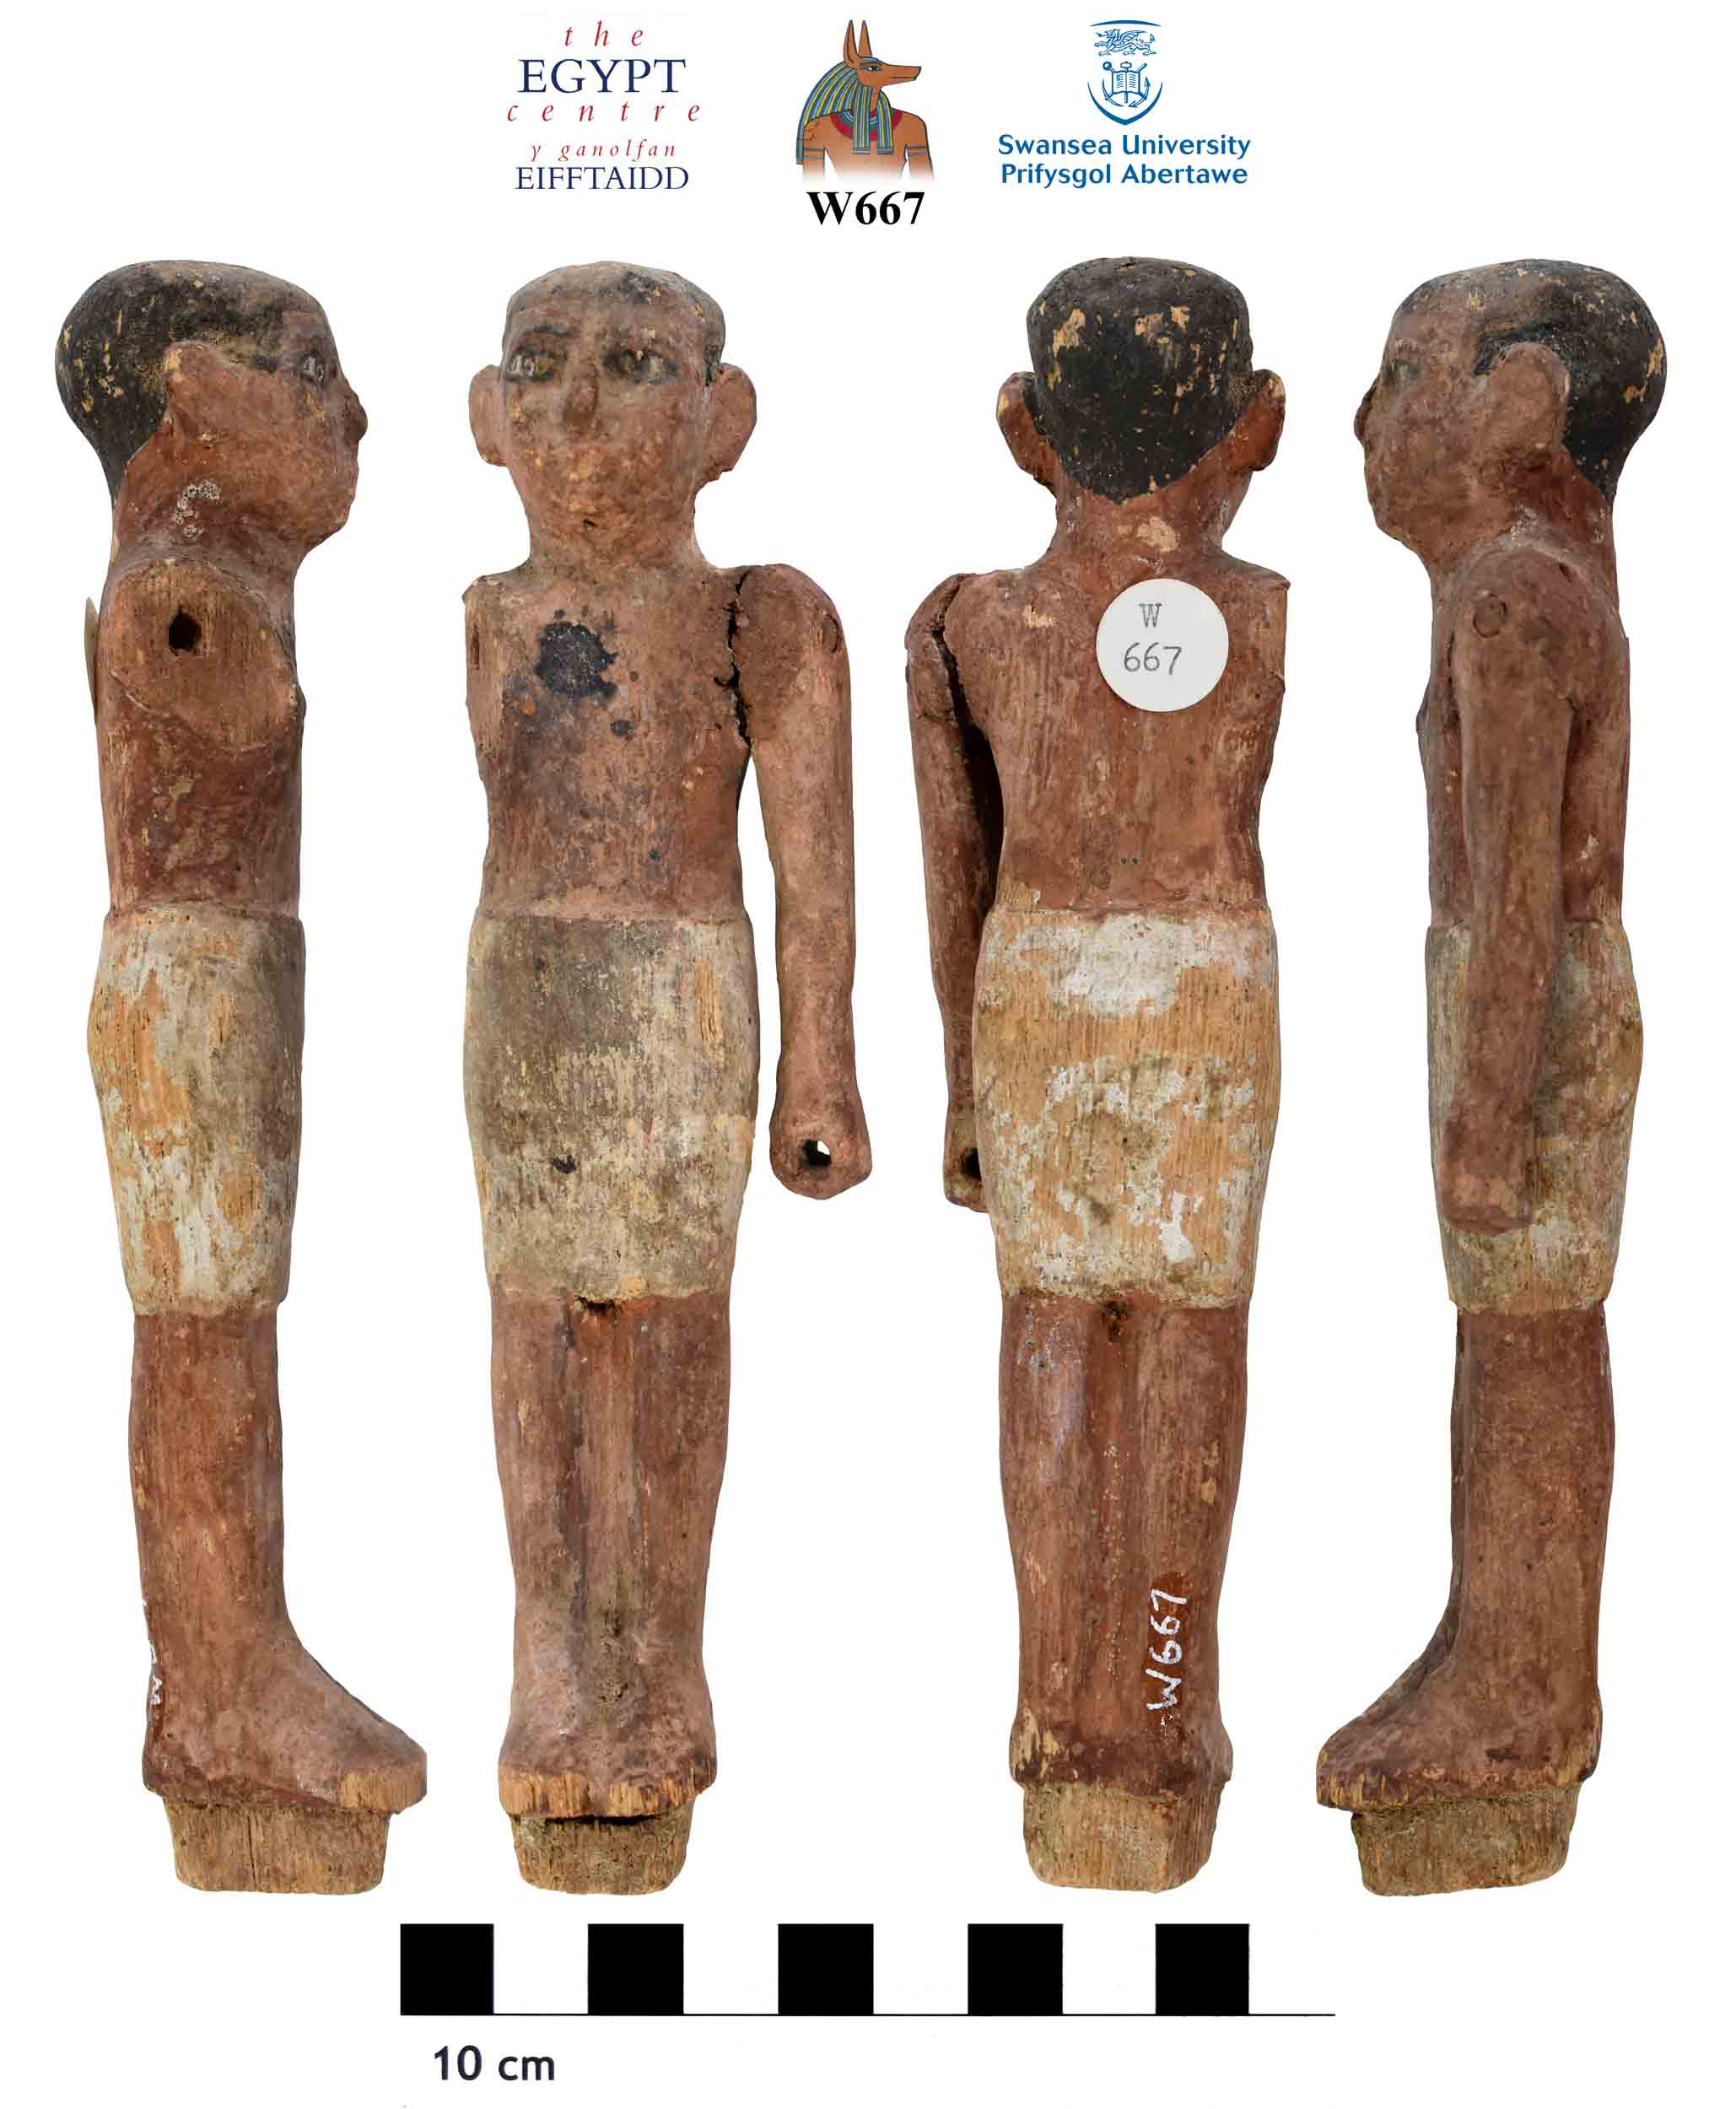 Image for: Wooden funerary figure